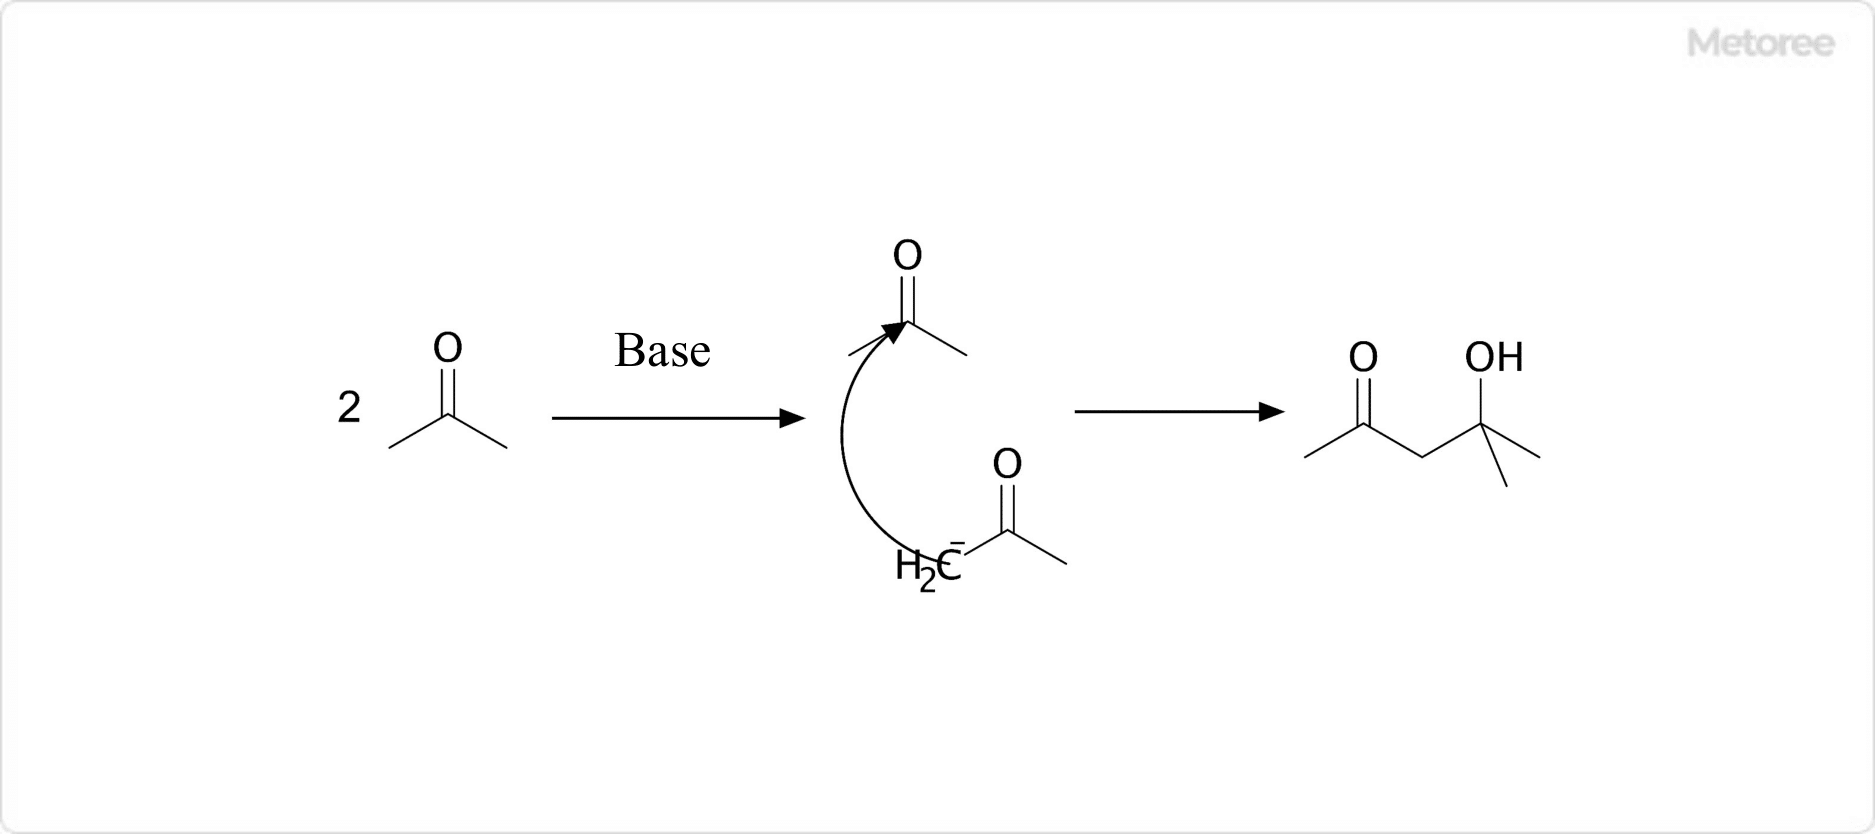 Figure 2. Synthesis of Diacetone Alcohol